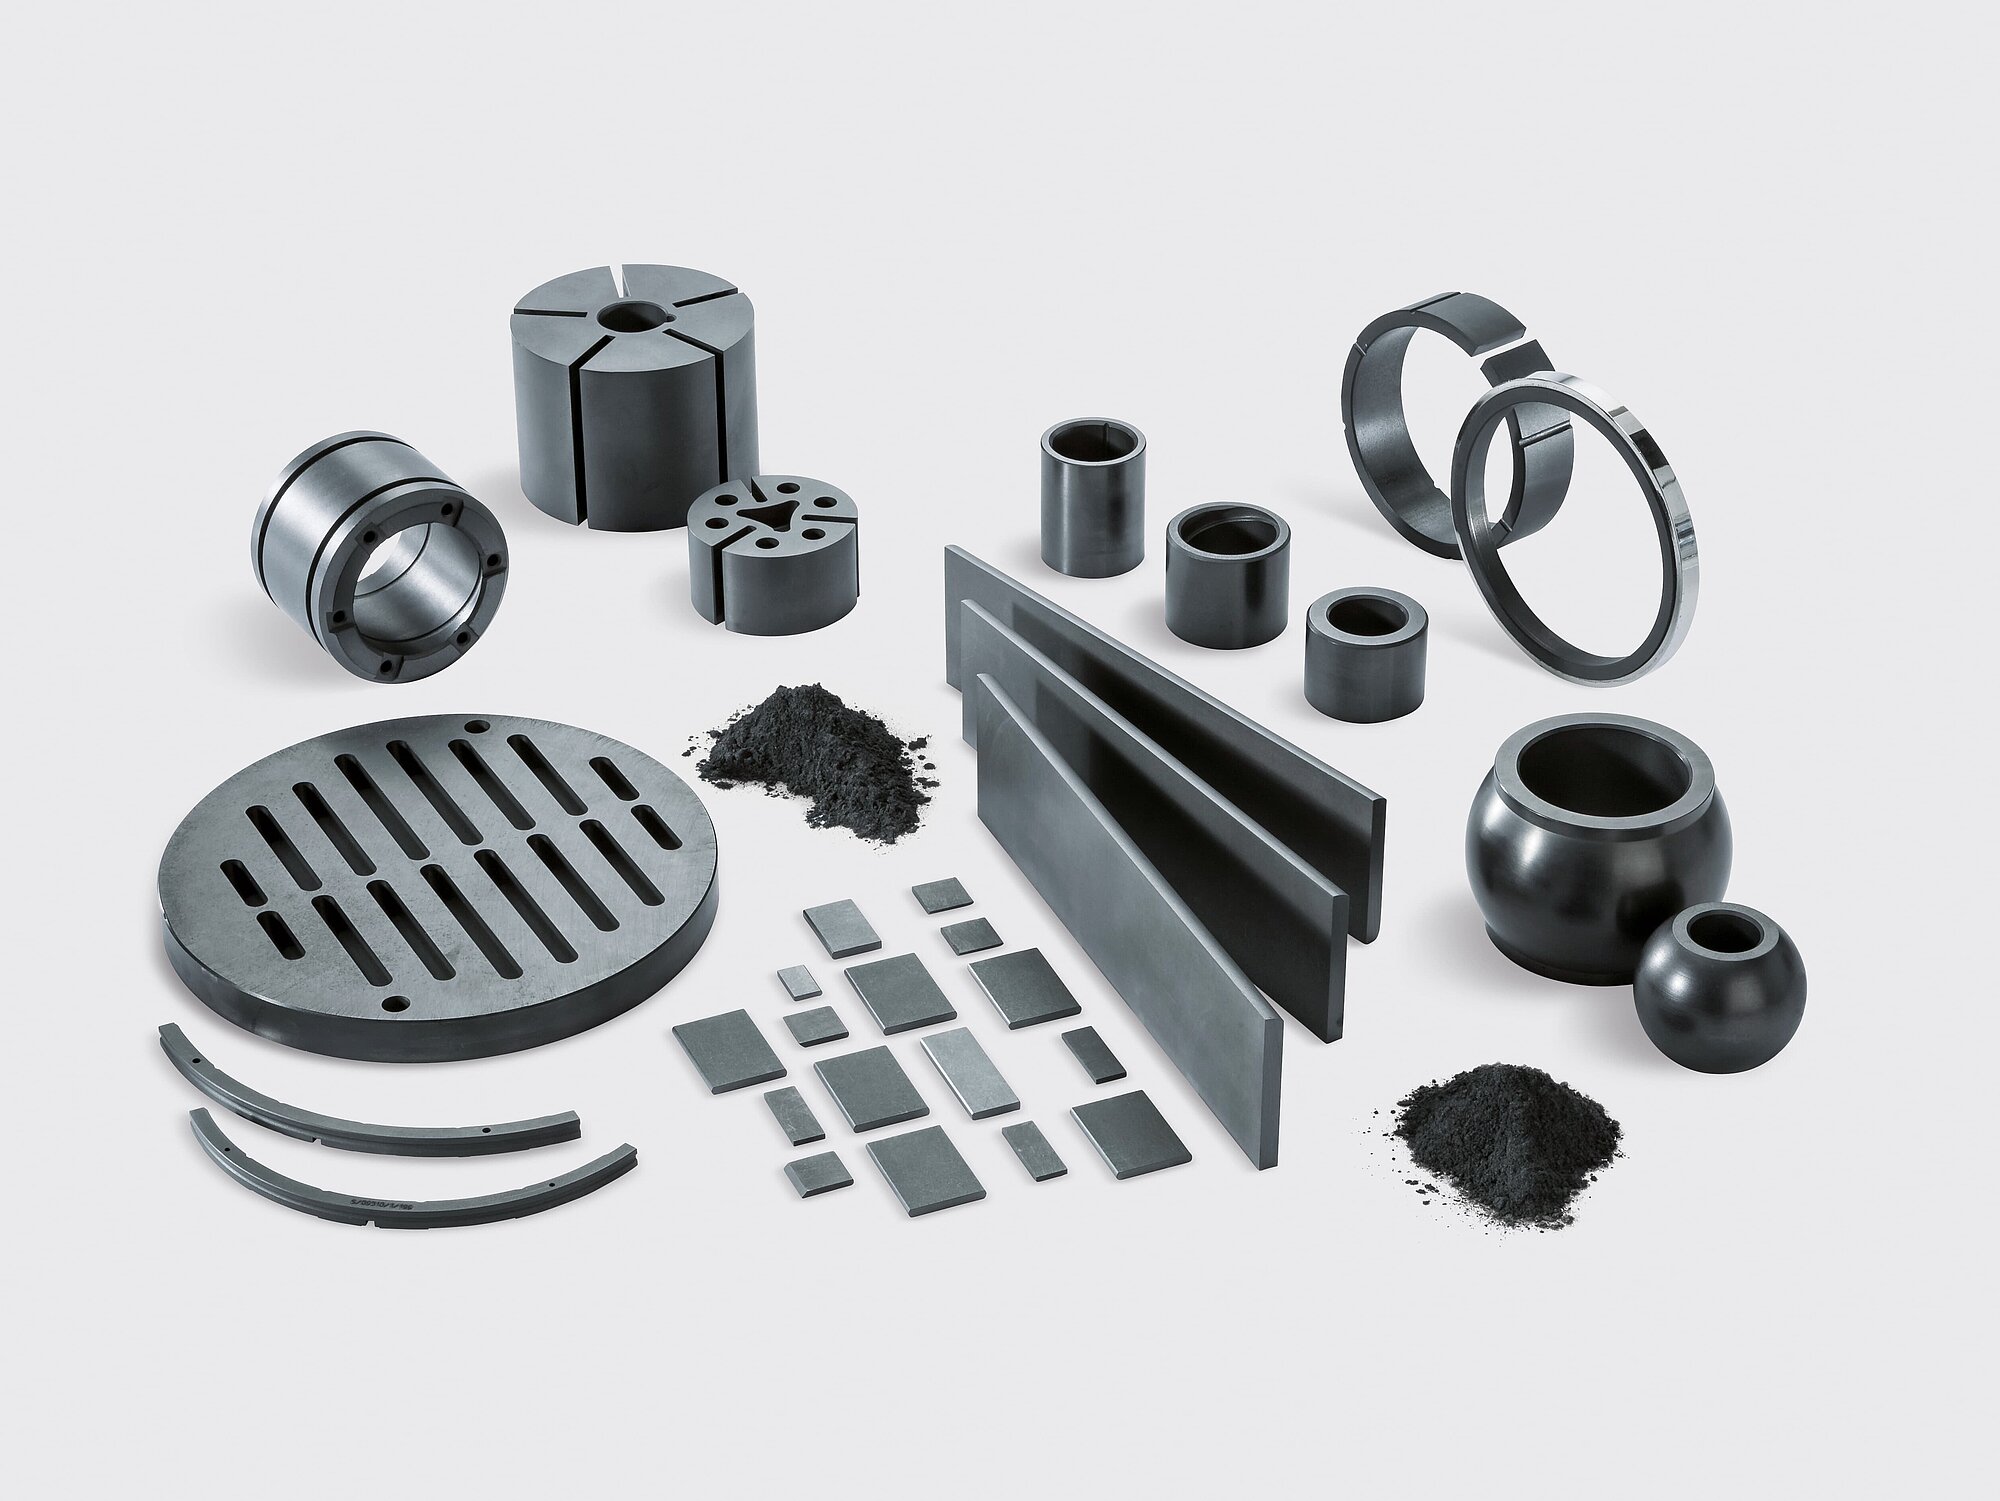 About Graphite - Graphite Products